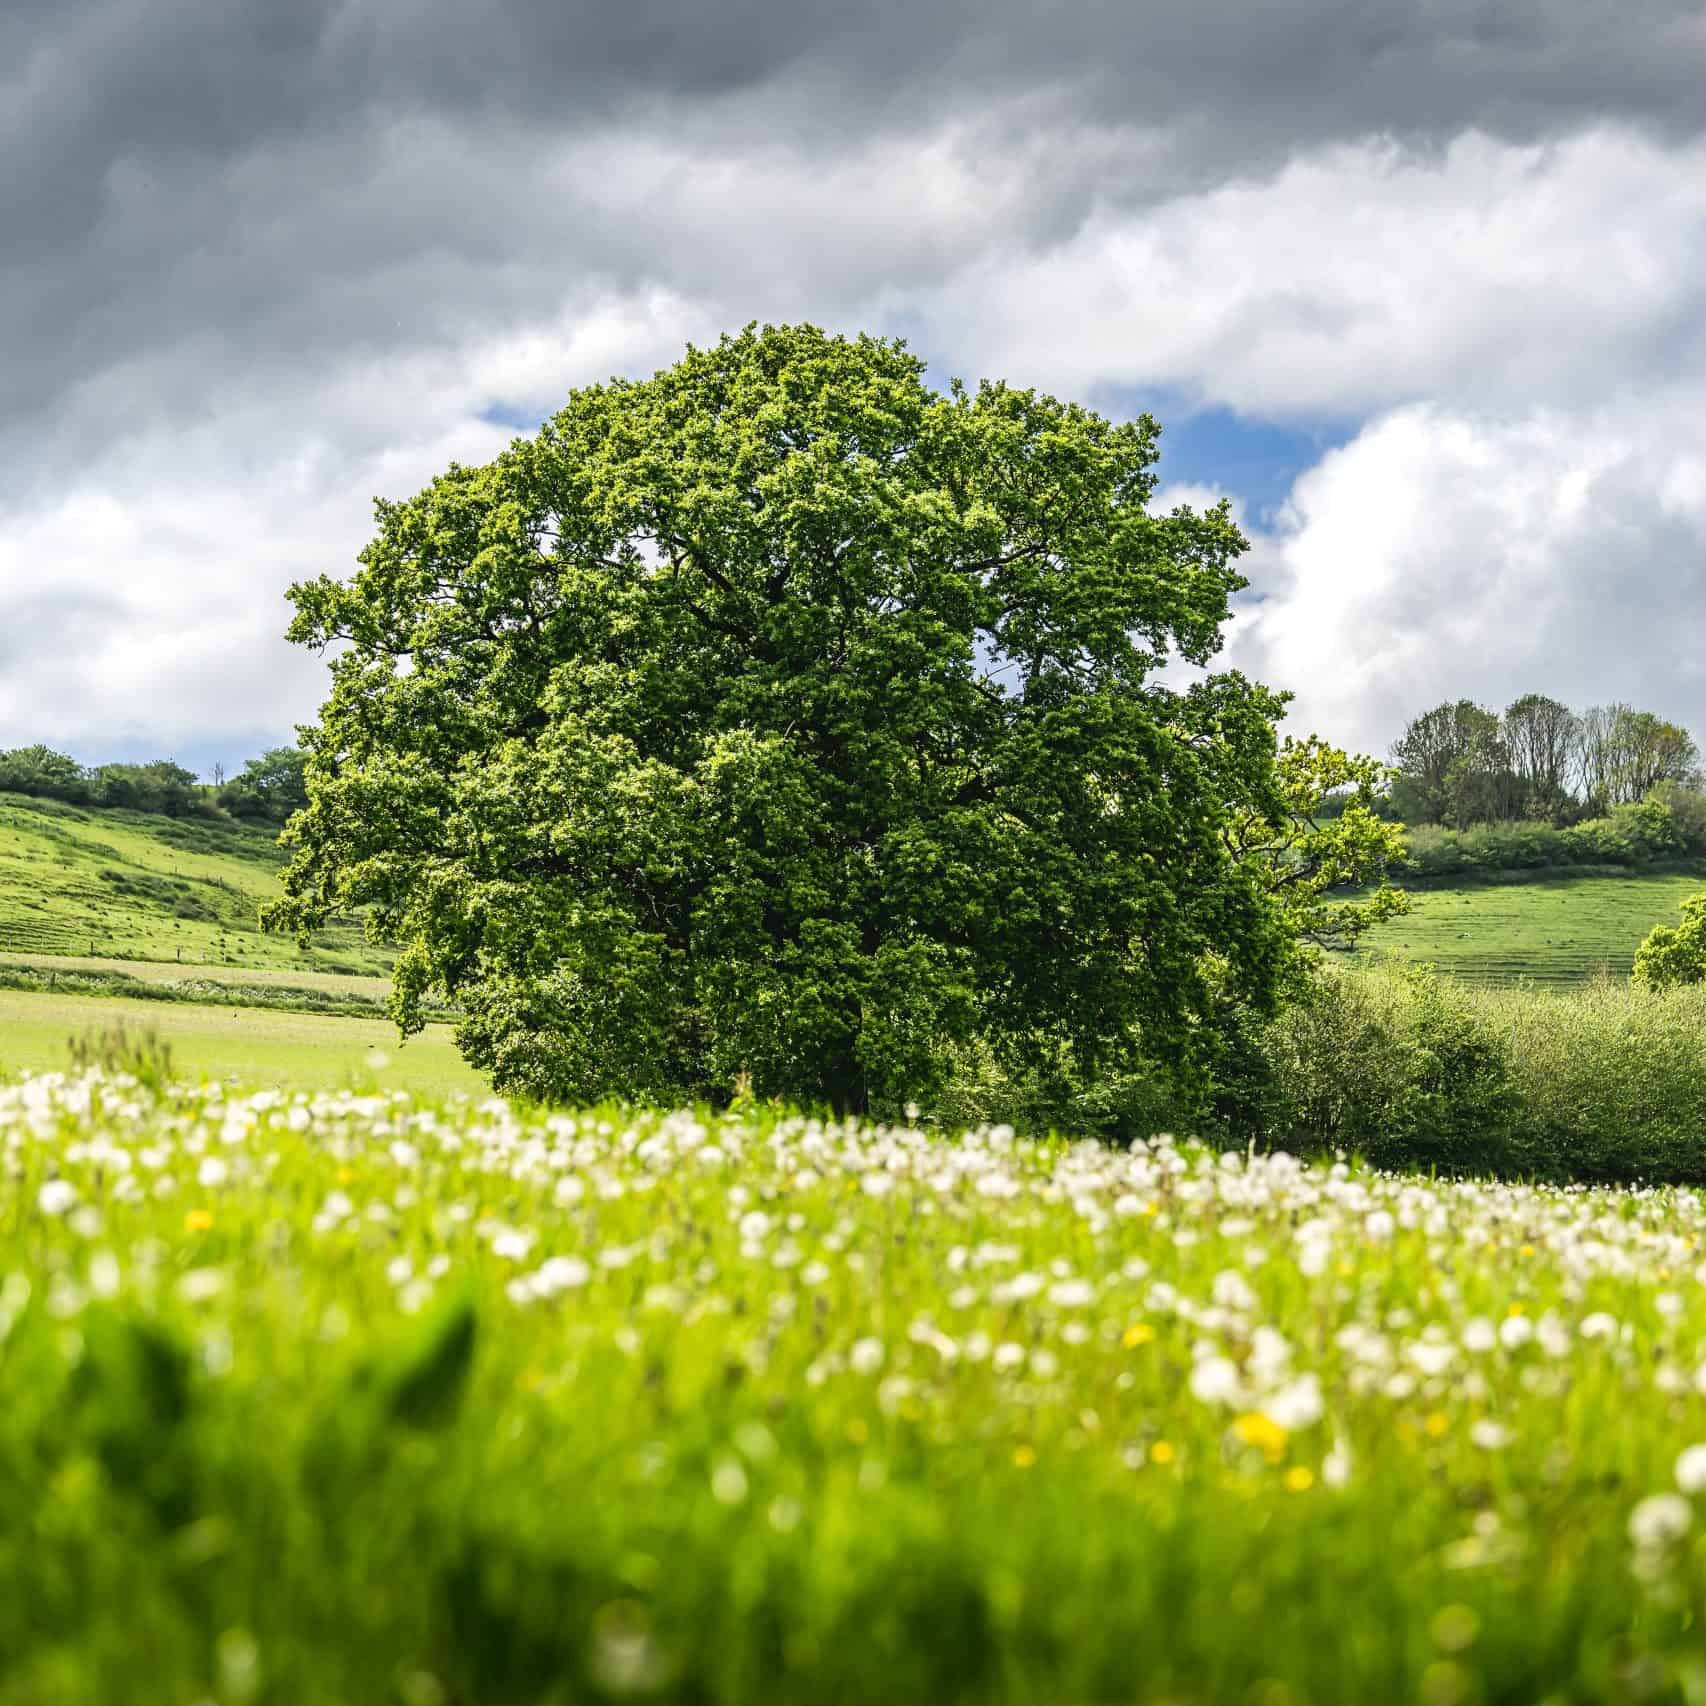 Field of organic clover with large tree